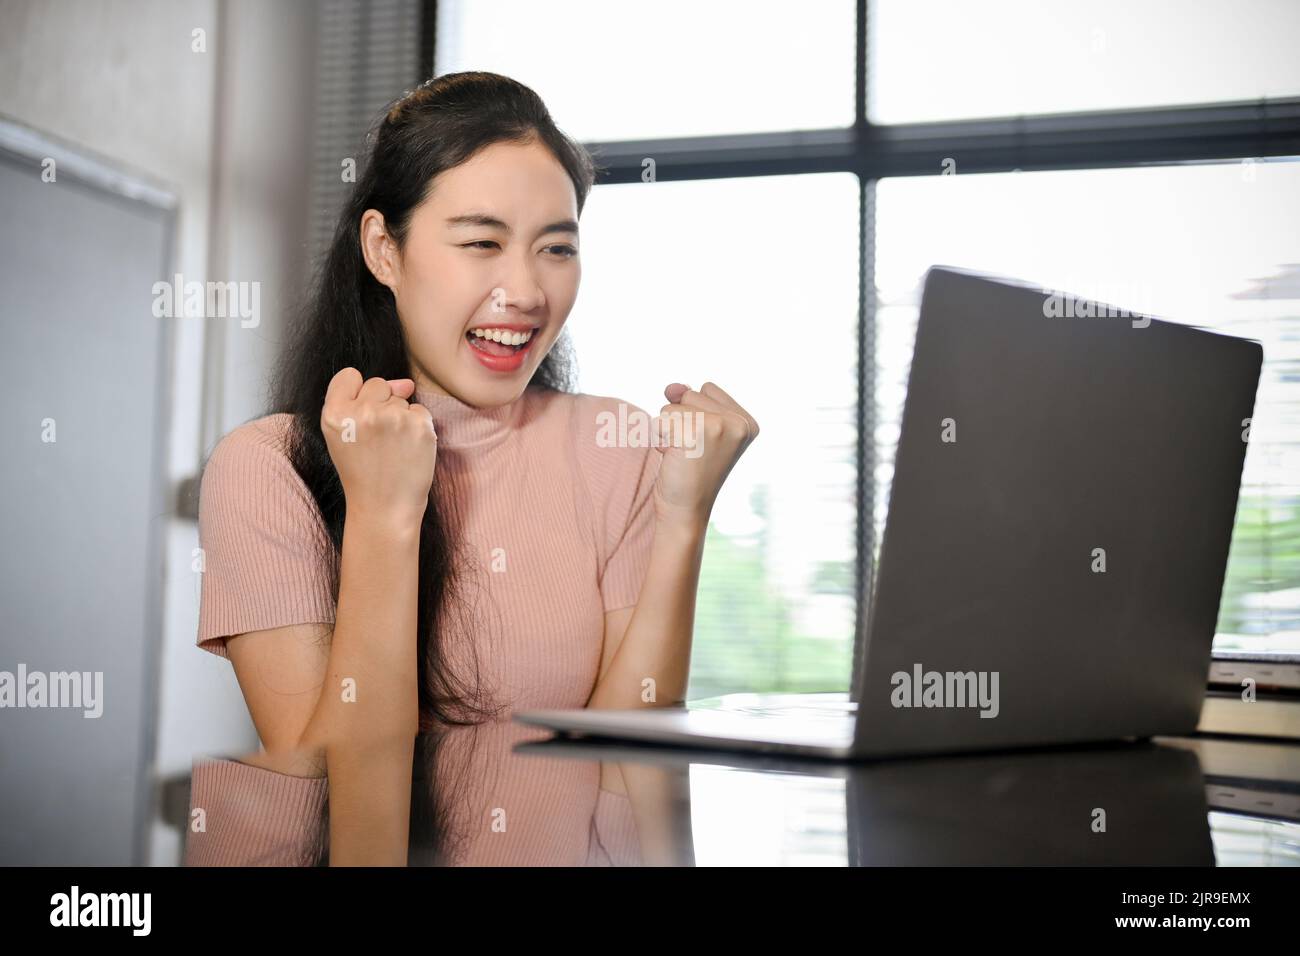 Excited young Asian female looking at laptop screen, happy after receiving a job offer email, a work promotion, or passing the hardest school test. Stock Photo